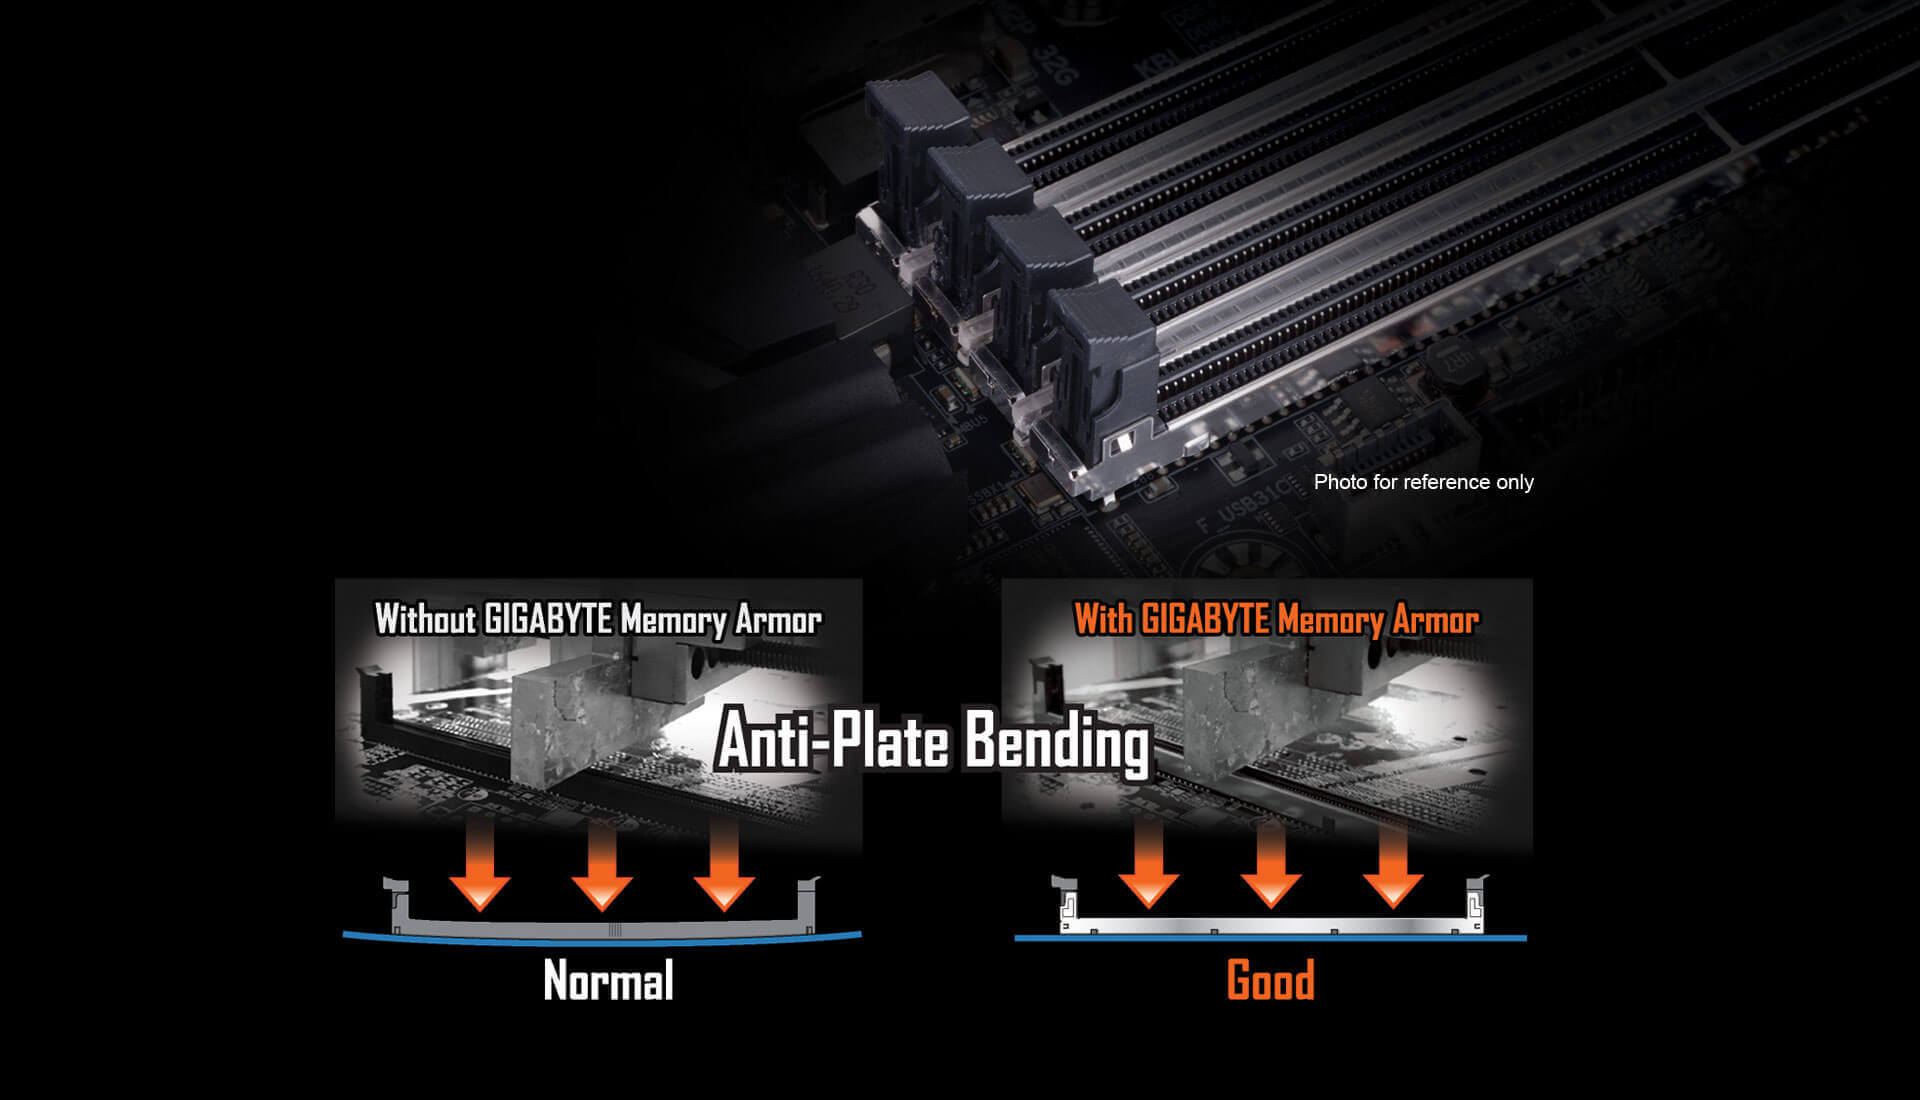 Anti-Plate Bending with GIGABYTE Memory Armor Versus Normal Settings That Don't Have the Armor